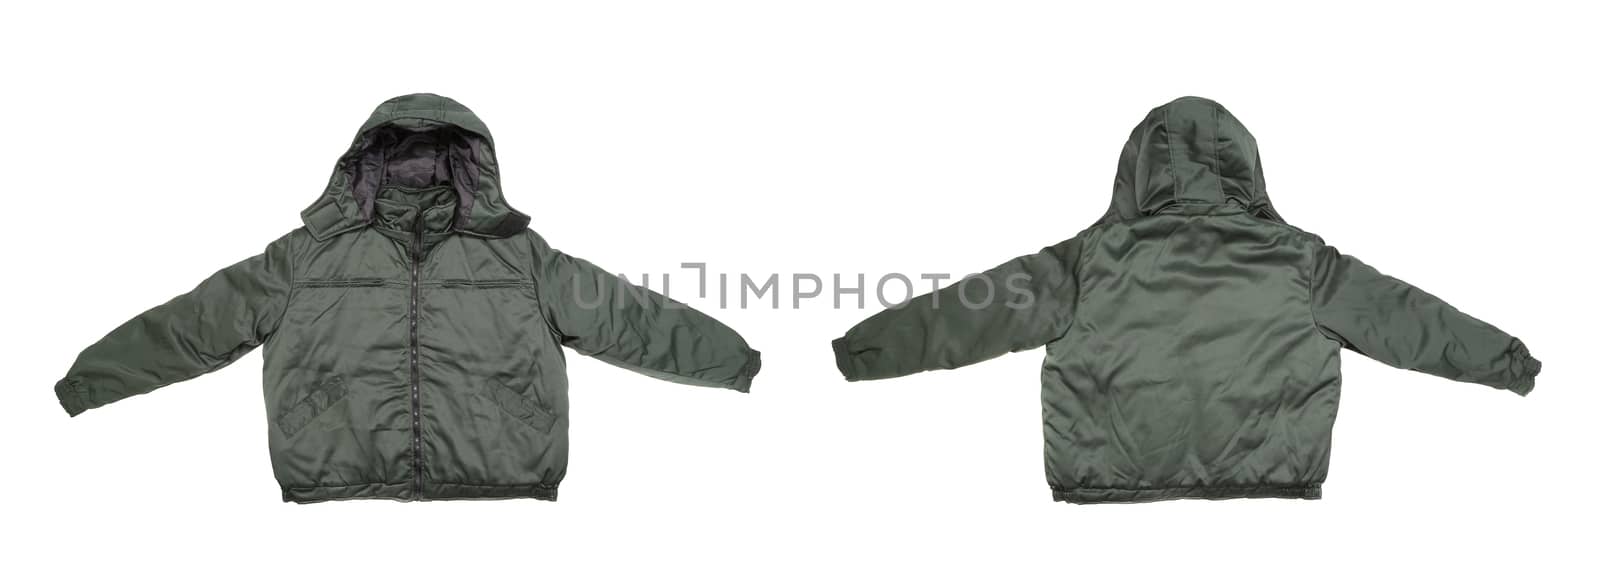 Gray male working jacket with hood. Isolated on white background.